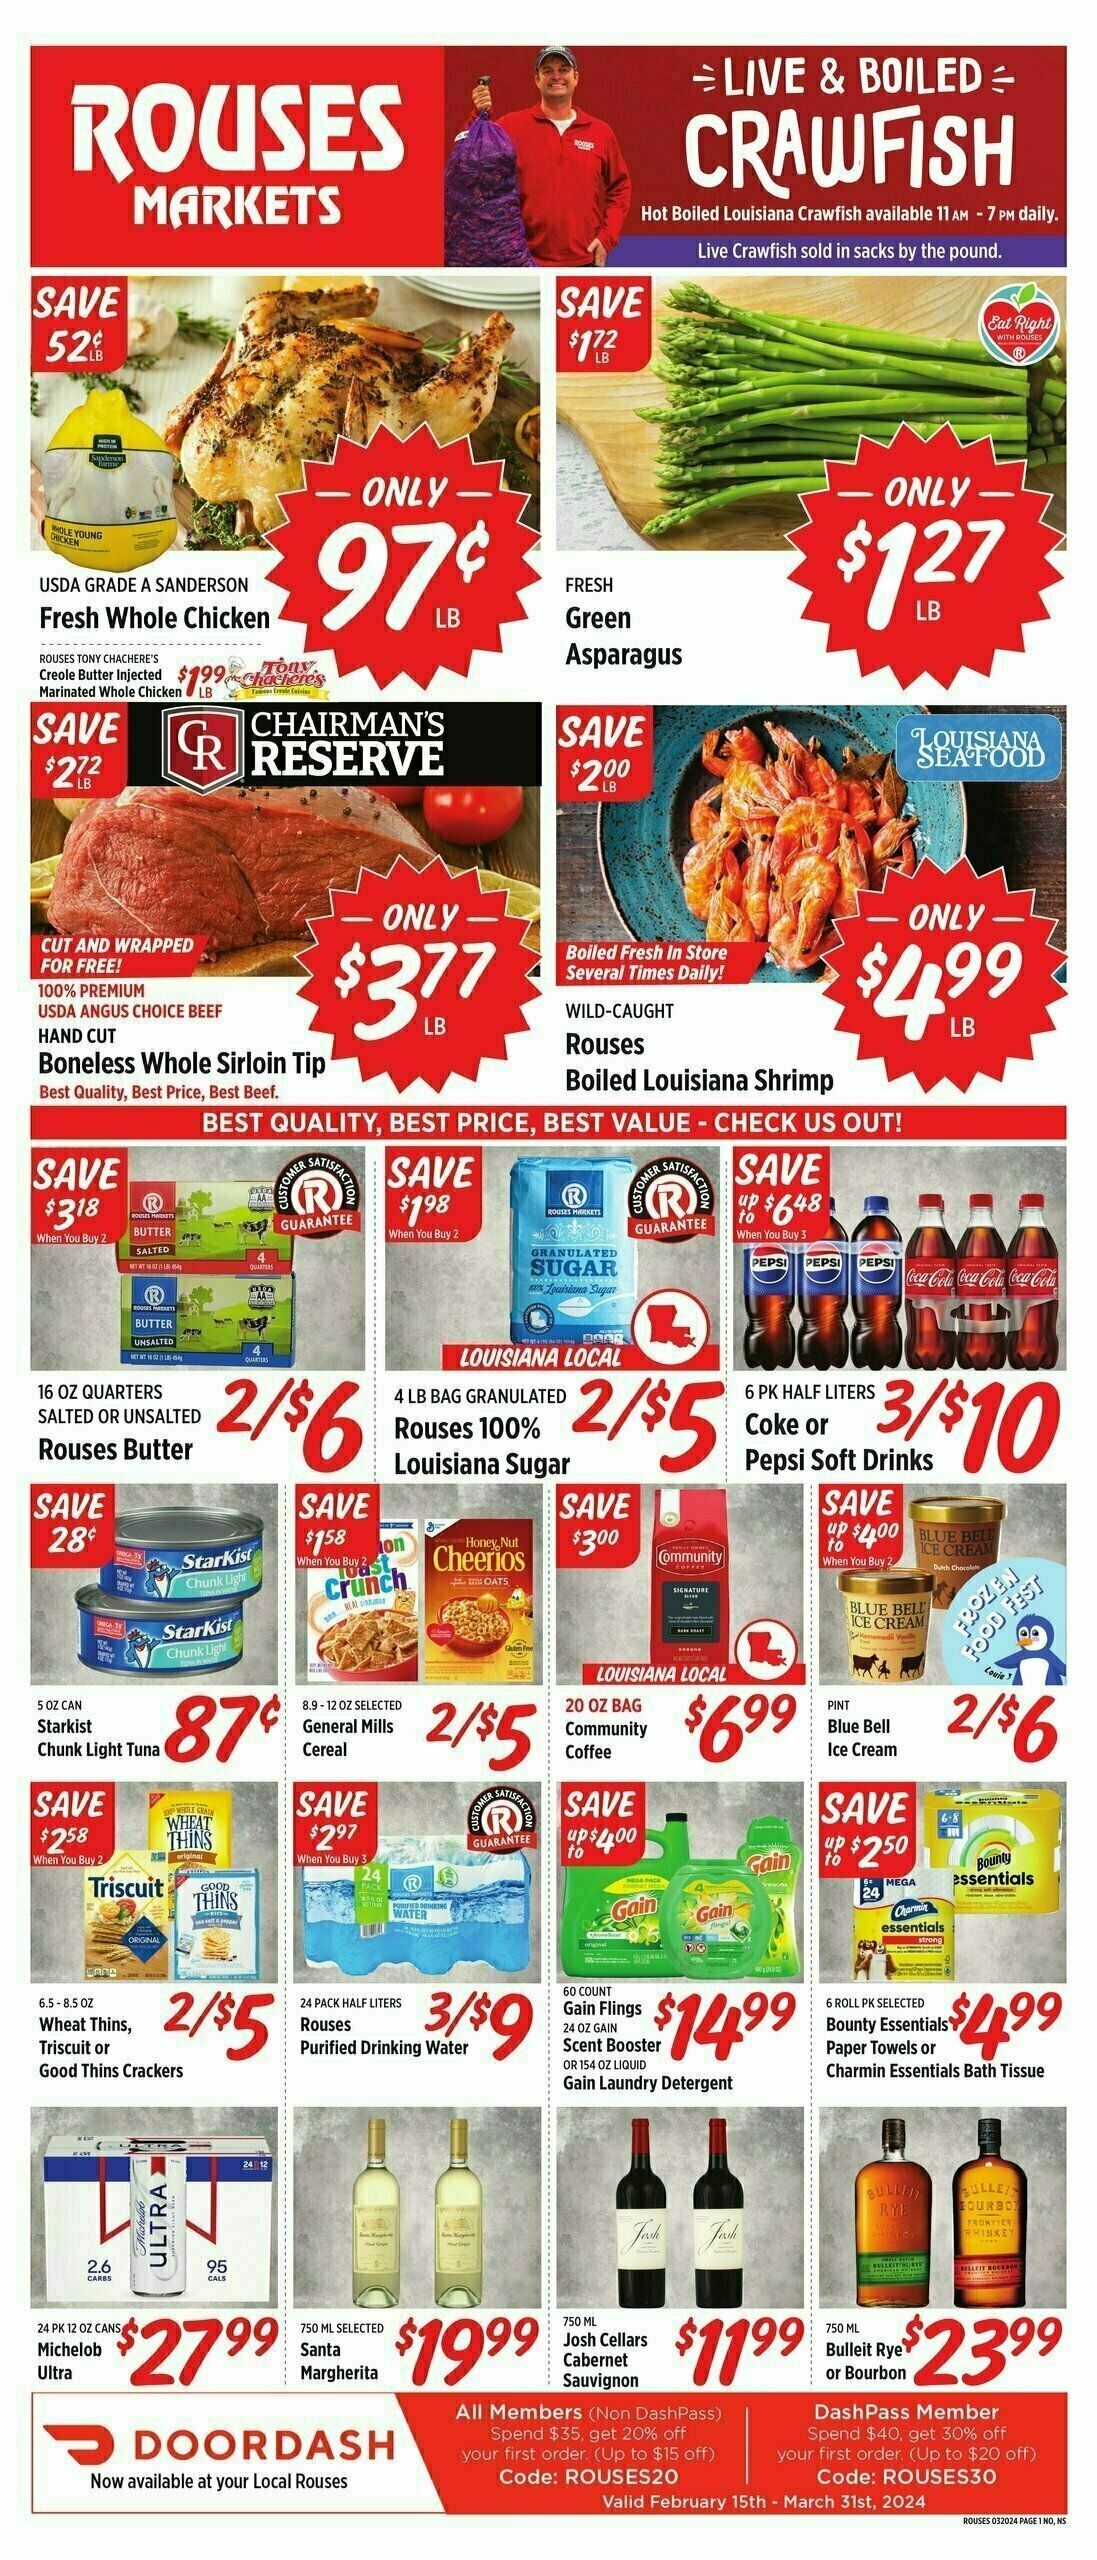 Rouses Markets Weekly Ad from March 20